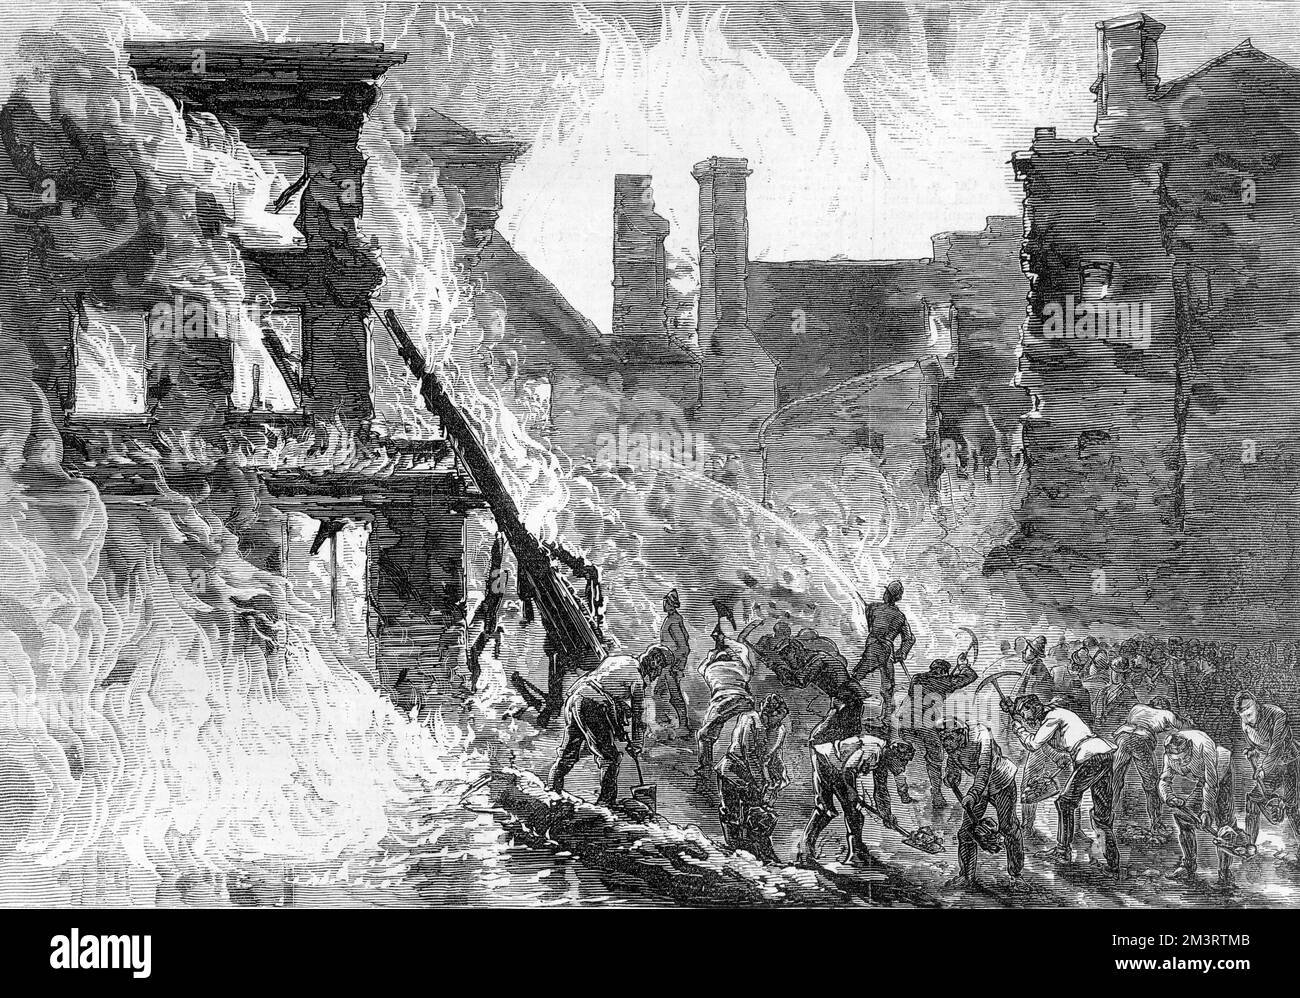 The Great Fire in Dublin: sappers cutting off the whisky flowing from Reid's malt-house and Malone's bonded warehouse in the Liberties area of the city where a fire broke out on the night of 18 June 1875.  According to the report in The Illustrated London News, a number of people died or were taken to hospital after scooping up the boiling hot whisky in hats and boots and then imbibing!  &quot;Two corn-porters, named Healy and McNulty, were found in a lane off Cork Street, lying insensible, with their boots off, which they had evidently used to collect the liquor.&quot;     Date: 1875 Stock Photo